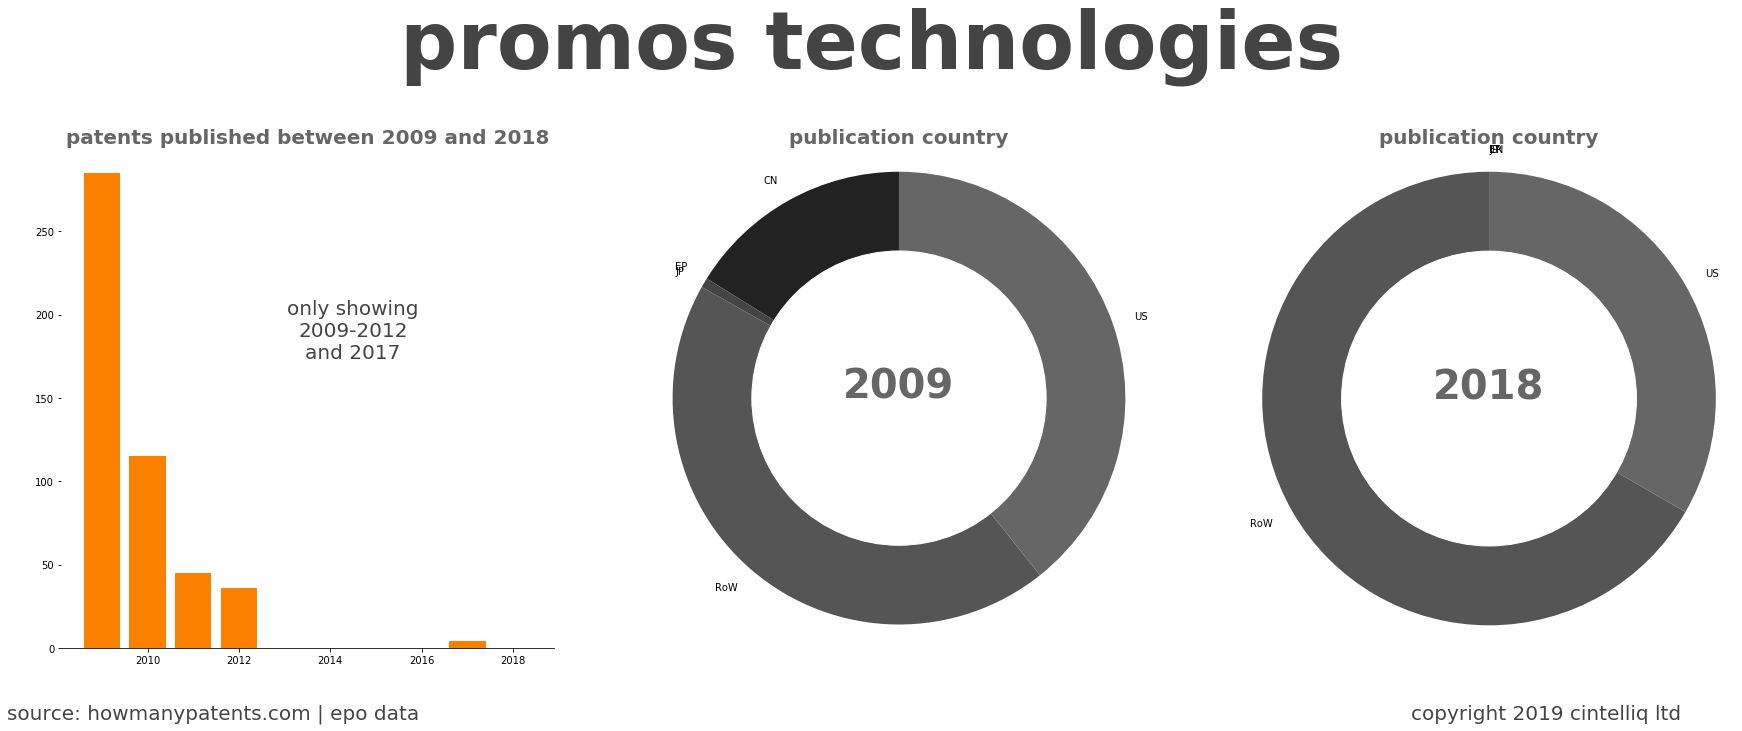 summary of patents for Promos Technologies